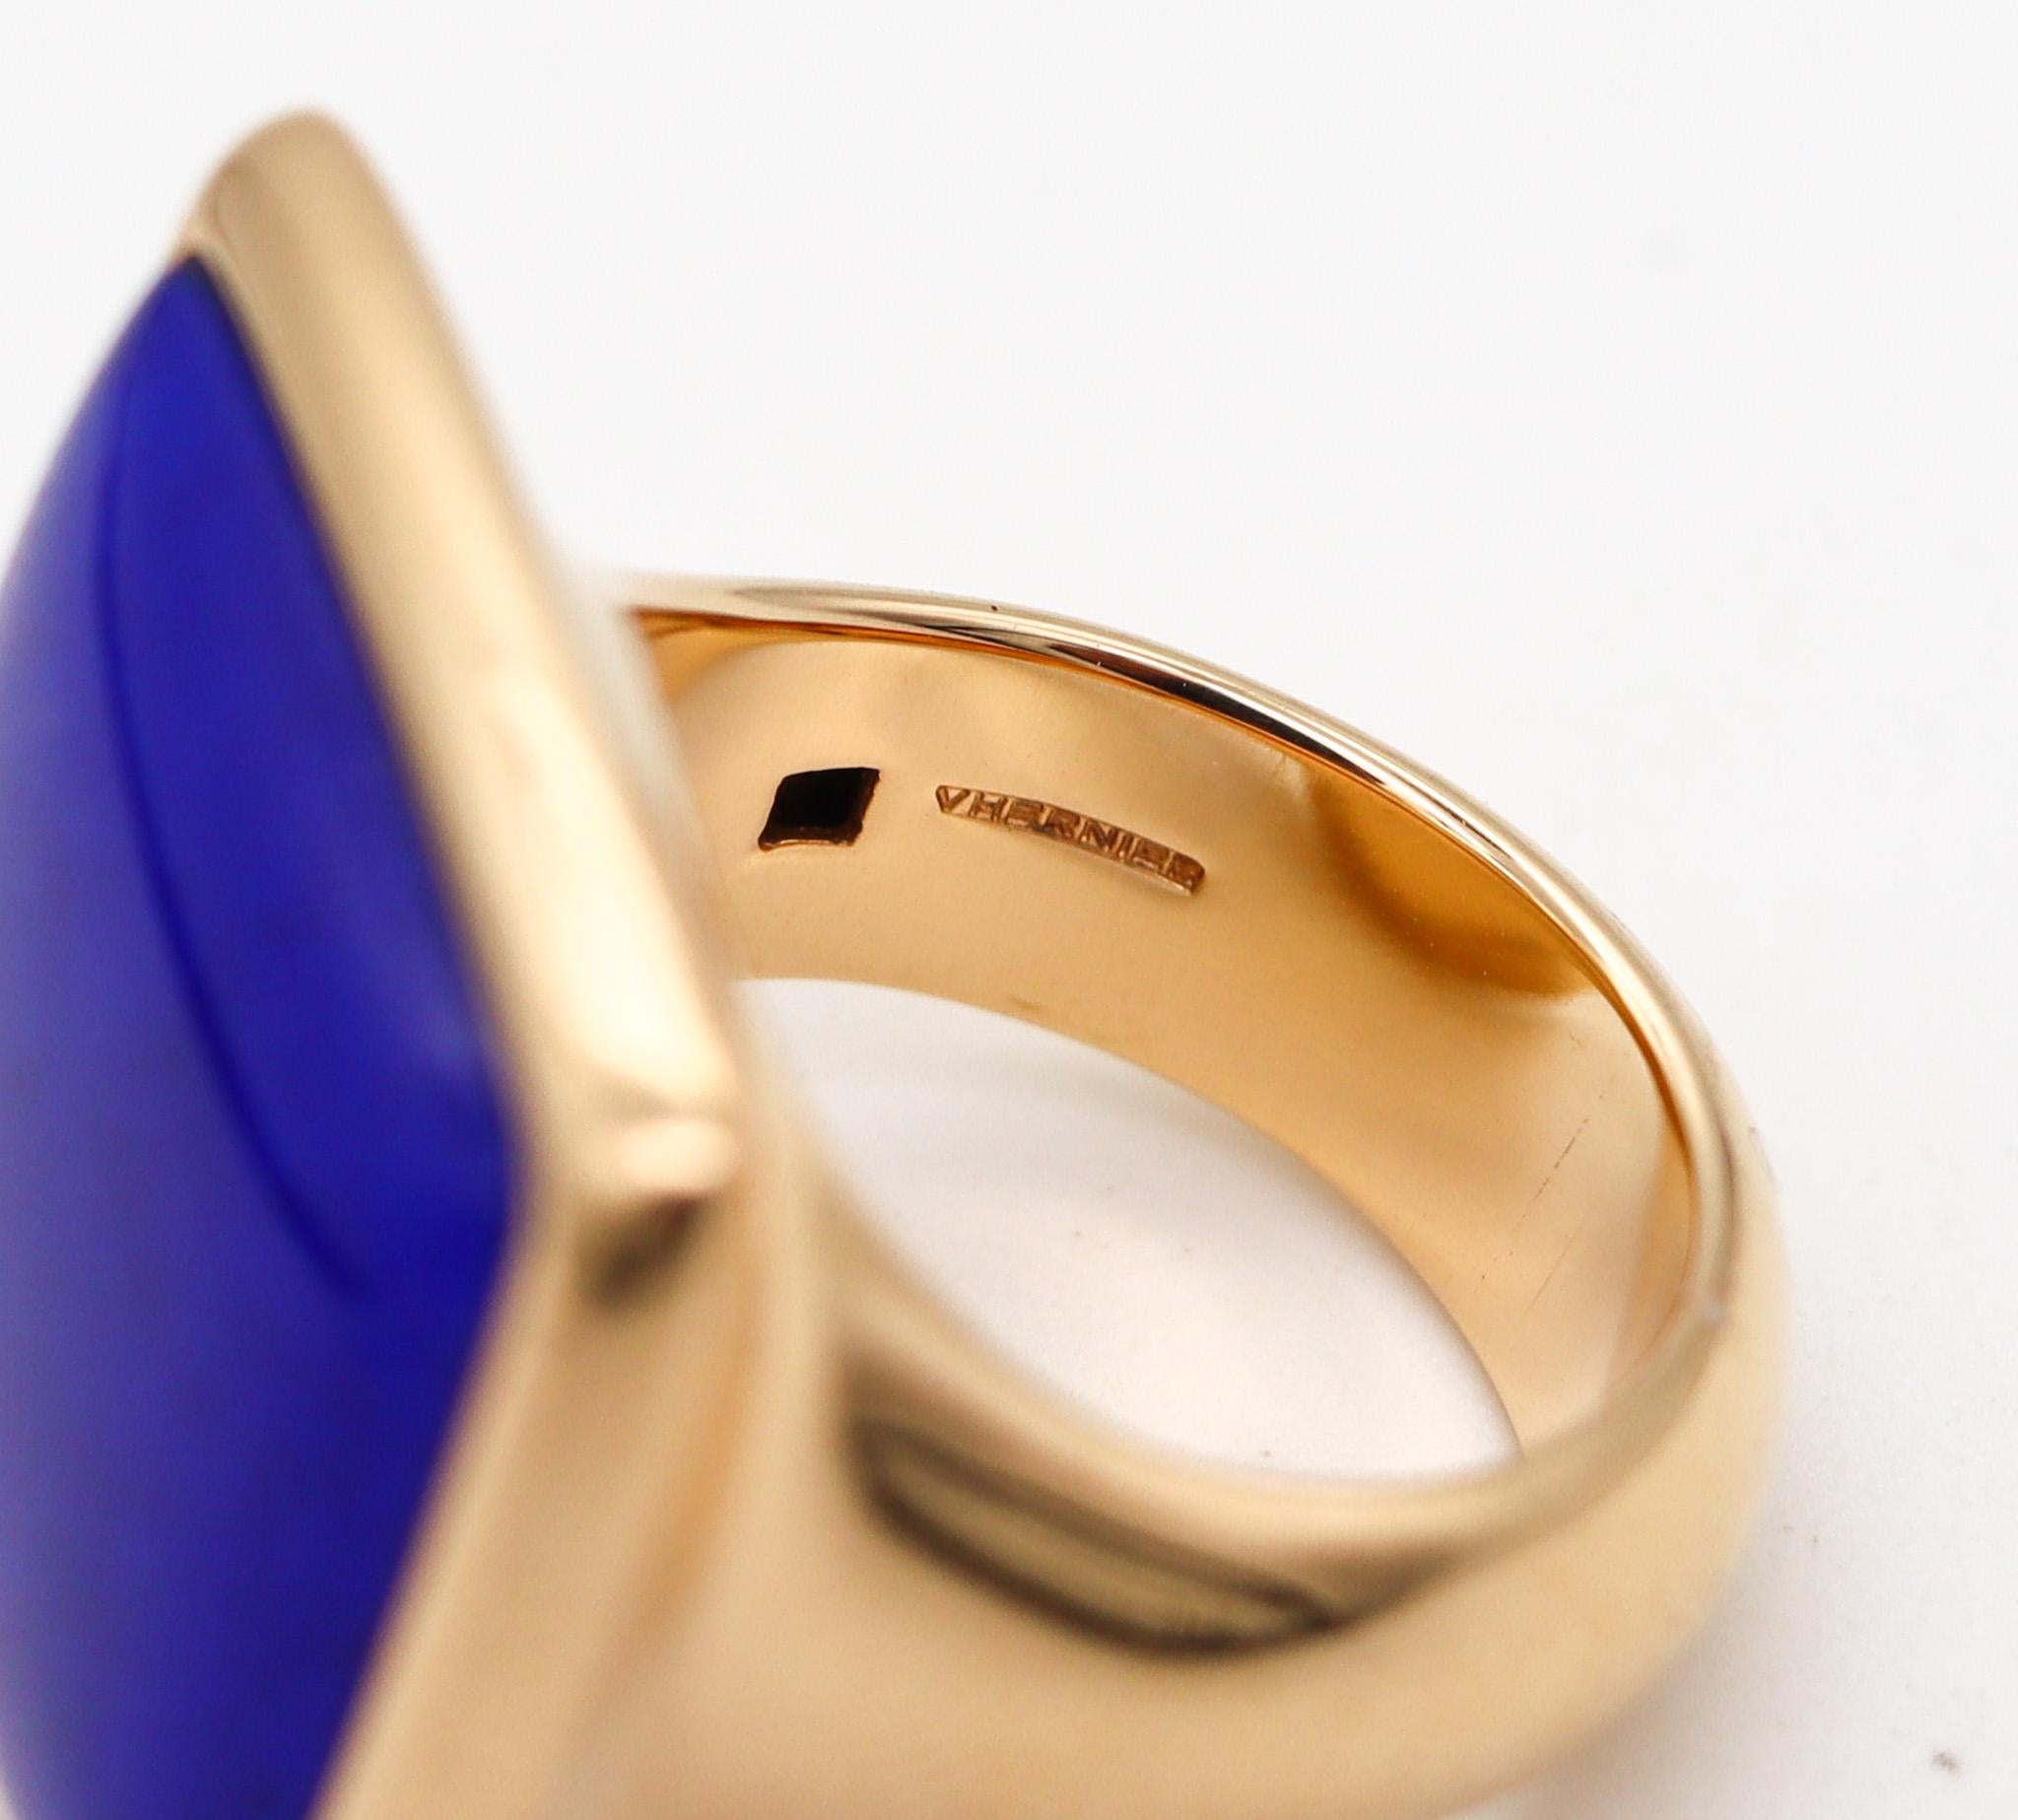 Women's Vhernier Milano Sculptural Cocktail Ring in 18kt Yellow Gold with Lapis & Quartz For Sale